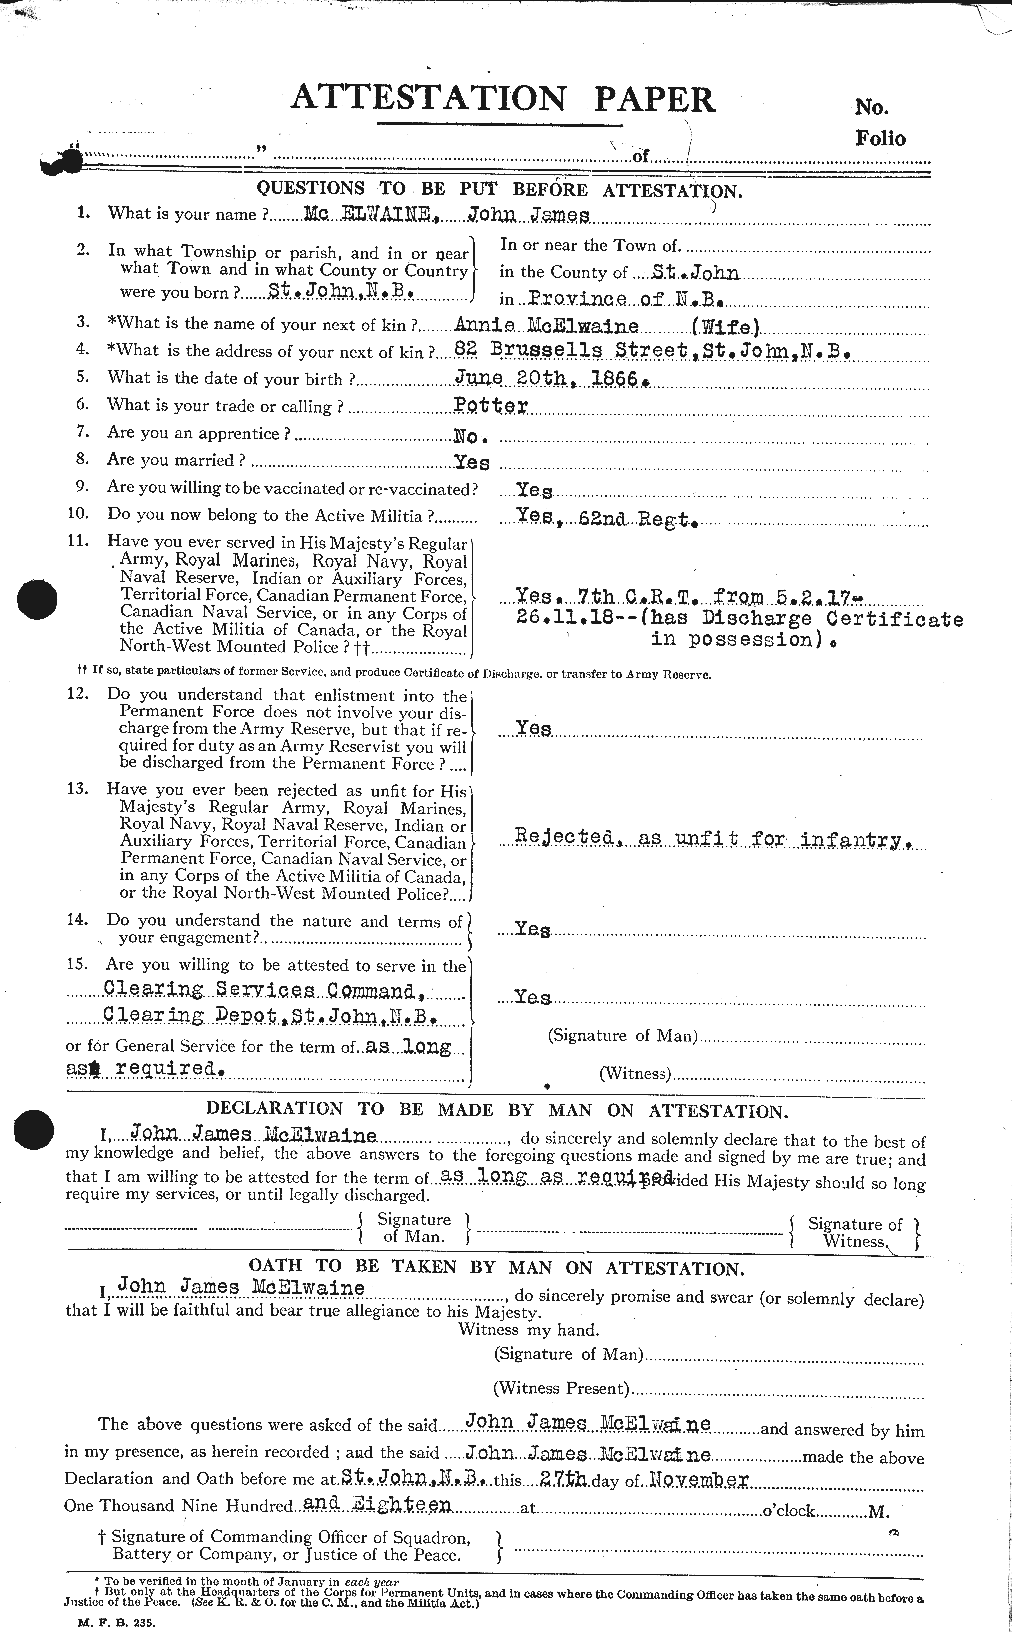 Personnel Records of the First World War - CEF 522115a